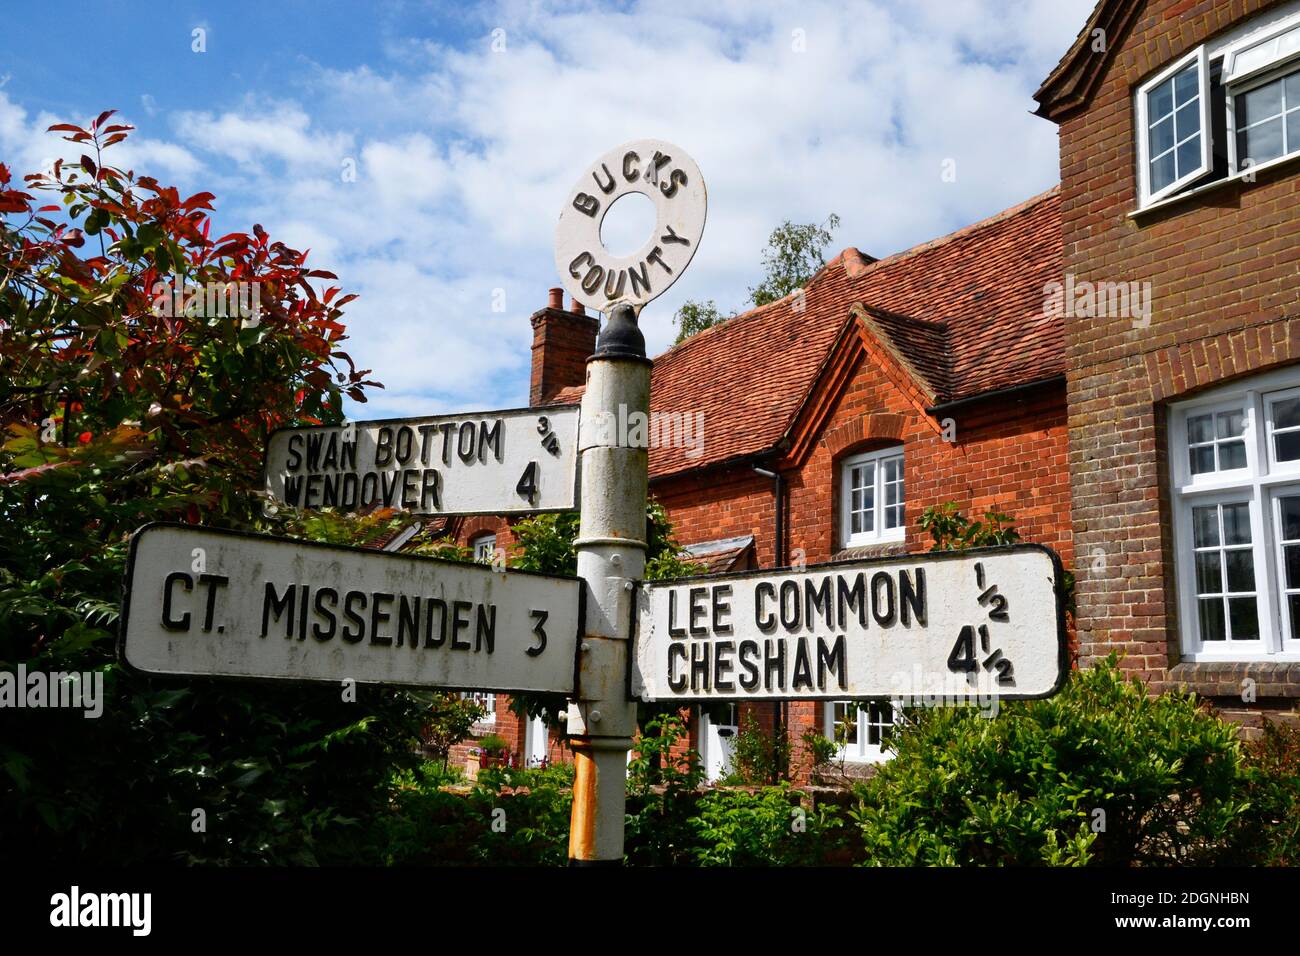 Sign post in Lee Common, a Village in Buckinghamshire, England, UK Stockfoto